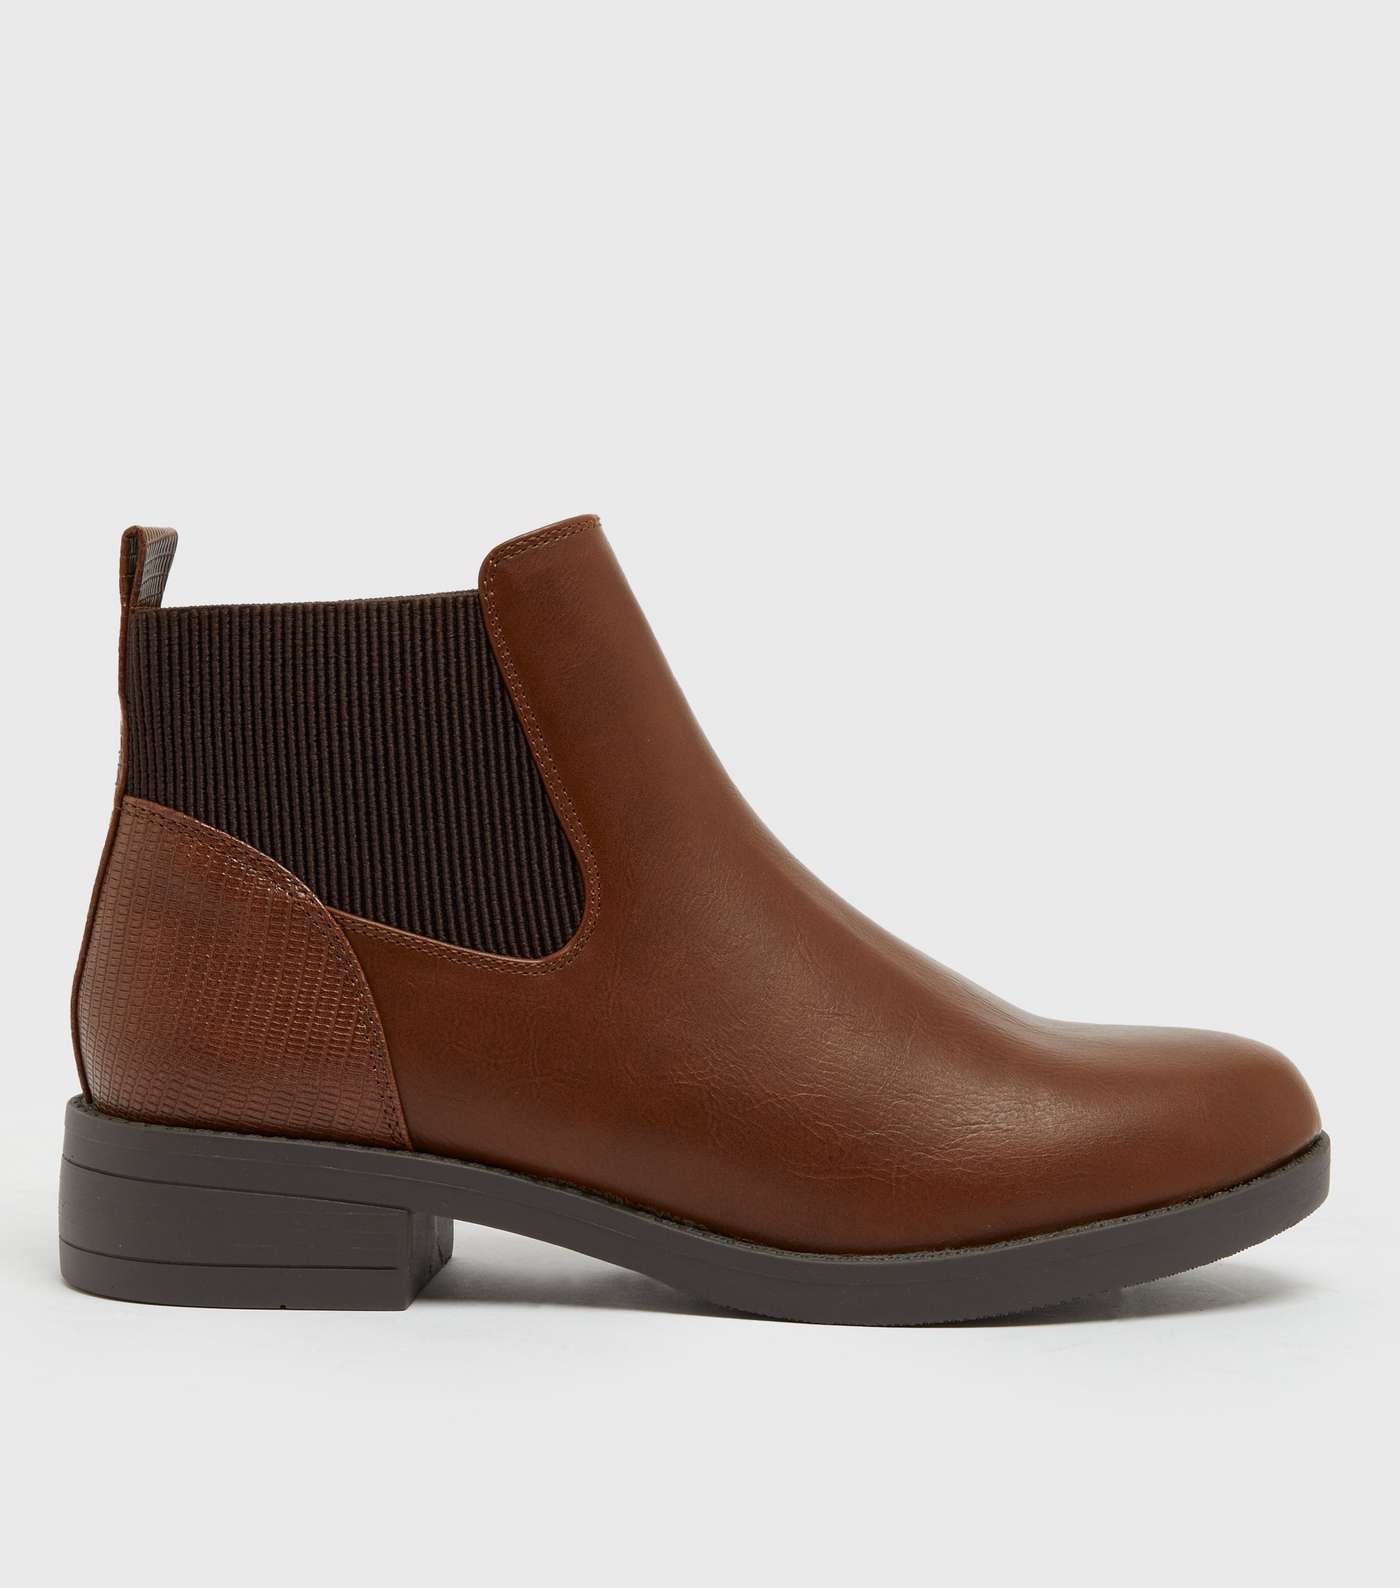 Girls Tan Round Toe Chelsea Boots